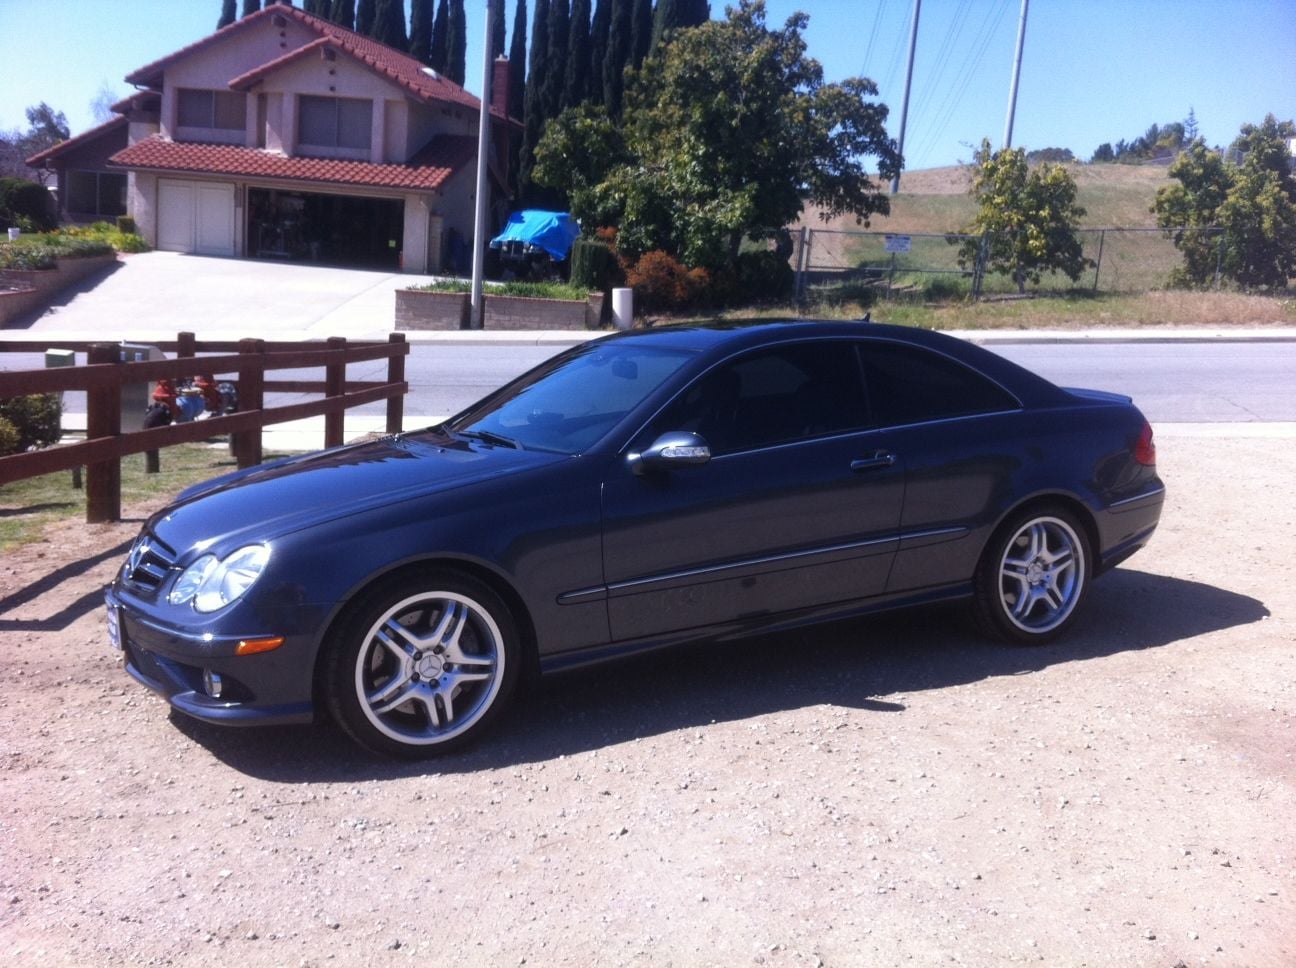 2008 Mercedes-Benz CLK550 - F/S 2008 CLK550 - Used - VIN WDBTJ72H58F244952 - 124 Miles - 8 cyl - 2WD - Automatic - Coupe - Gray - Reno/sparks, NV 89436, United States